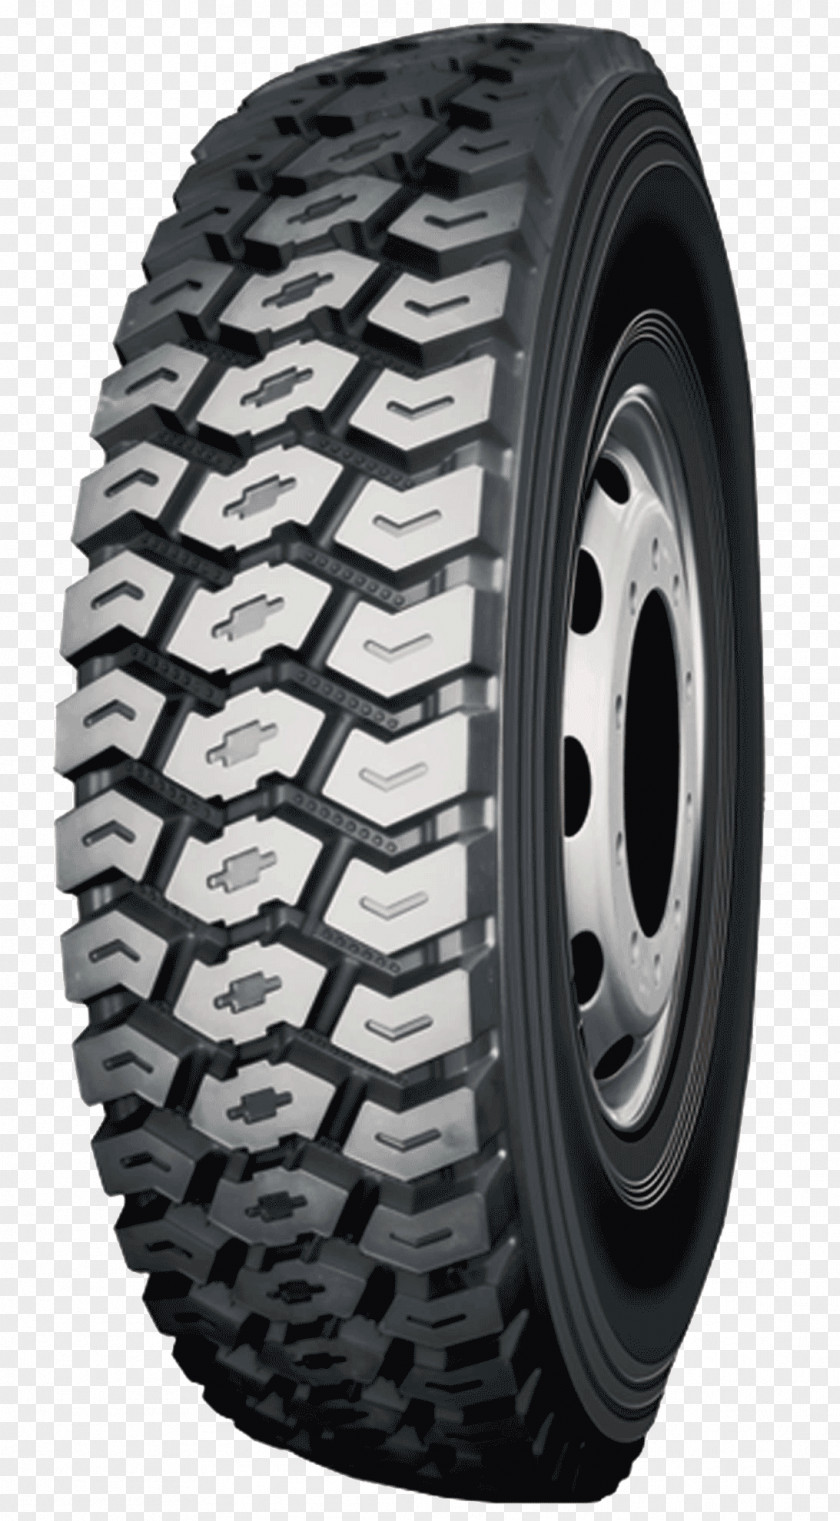 Rubber Tires Goodyear Tire And Company Truck Radial Michelin PNG